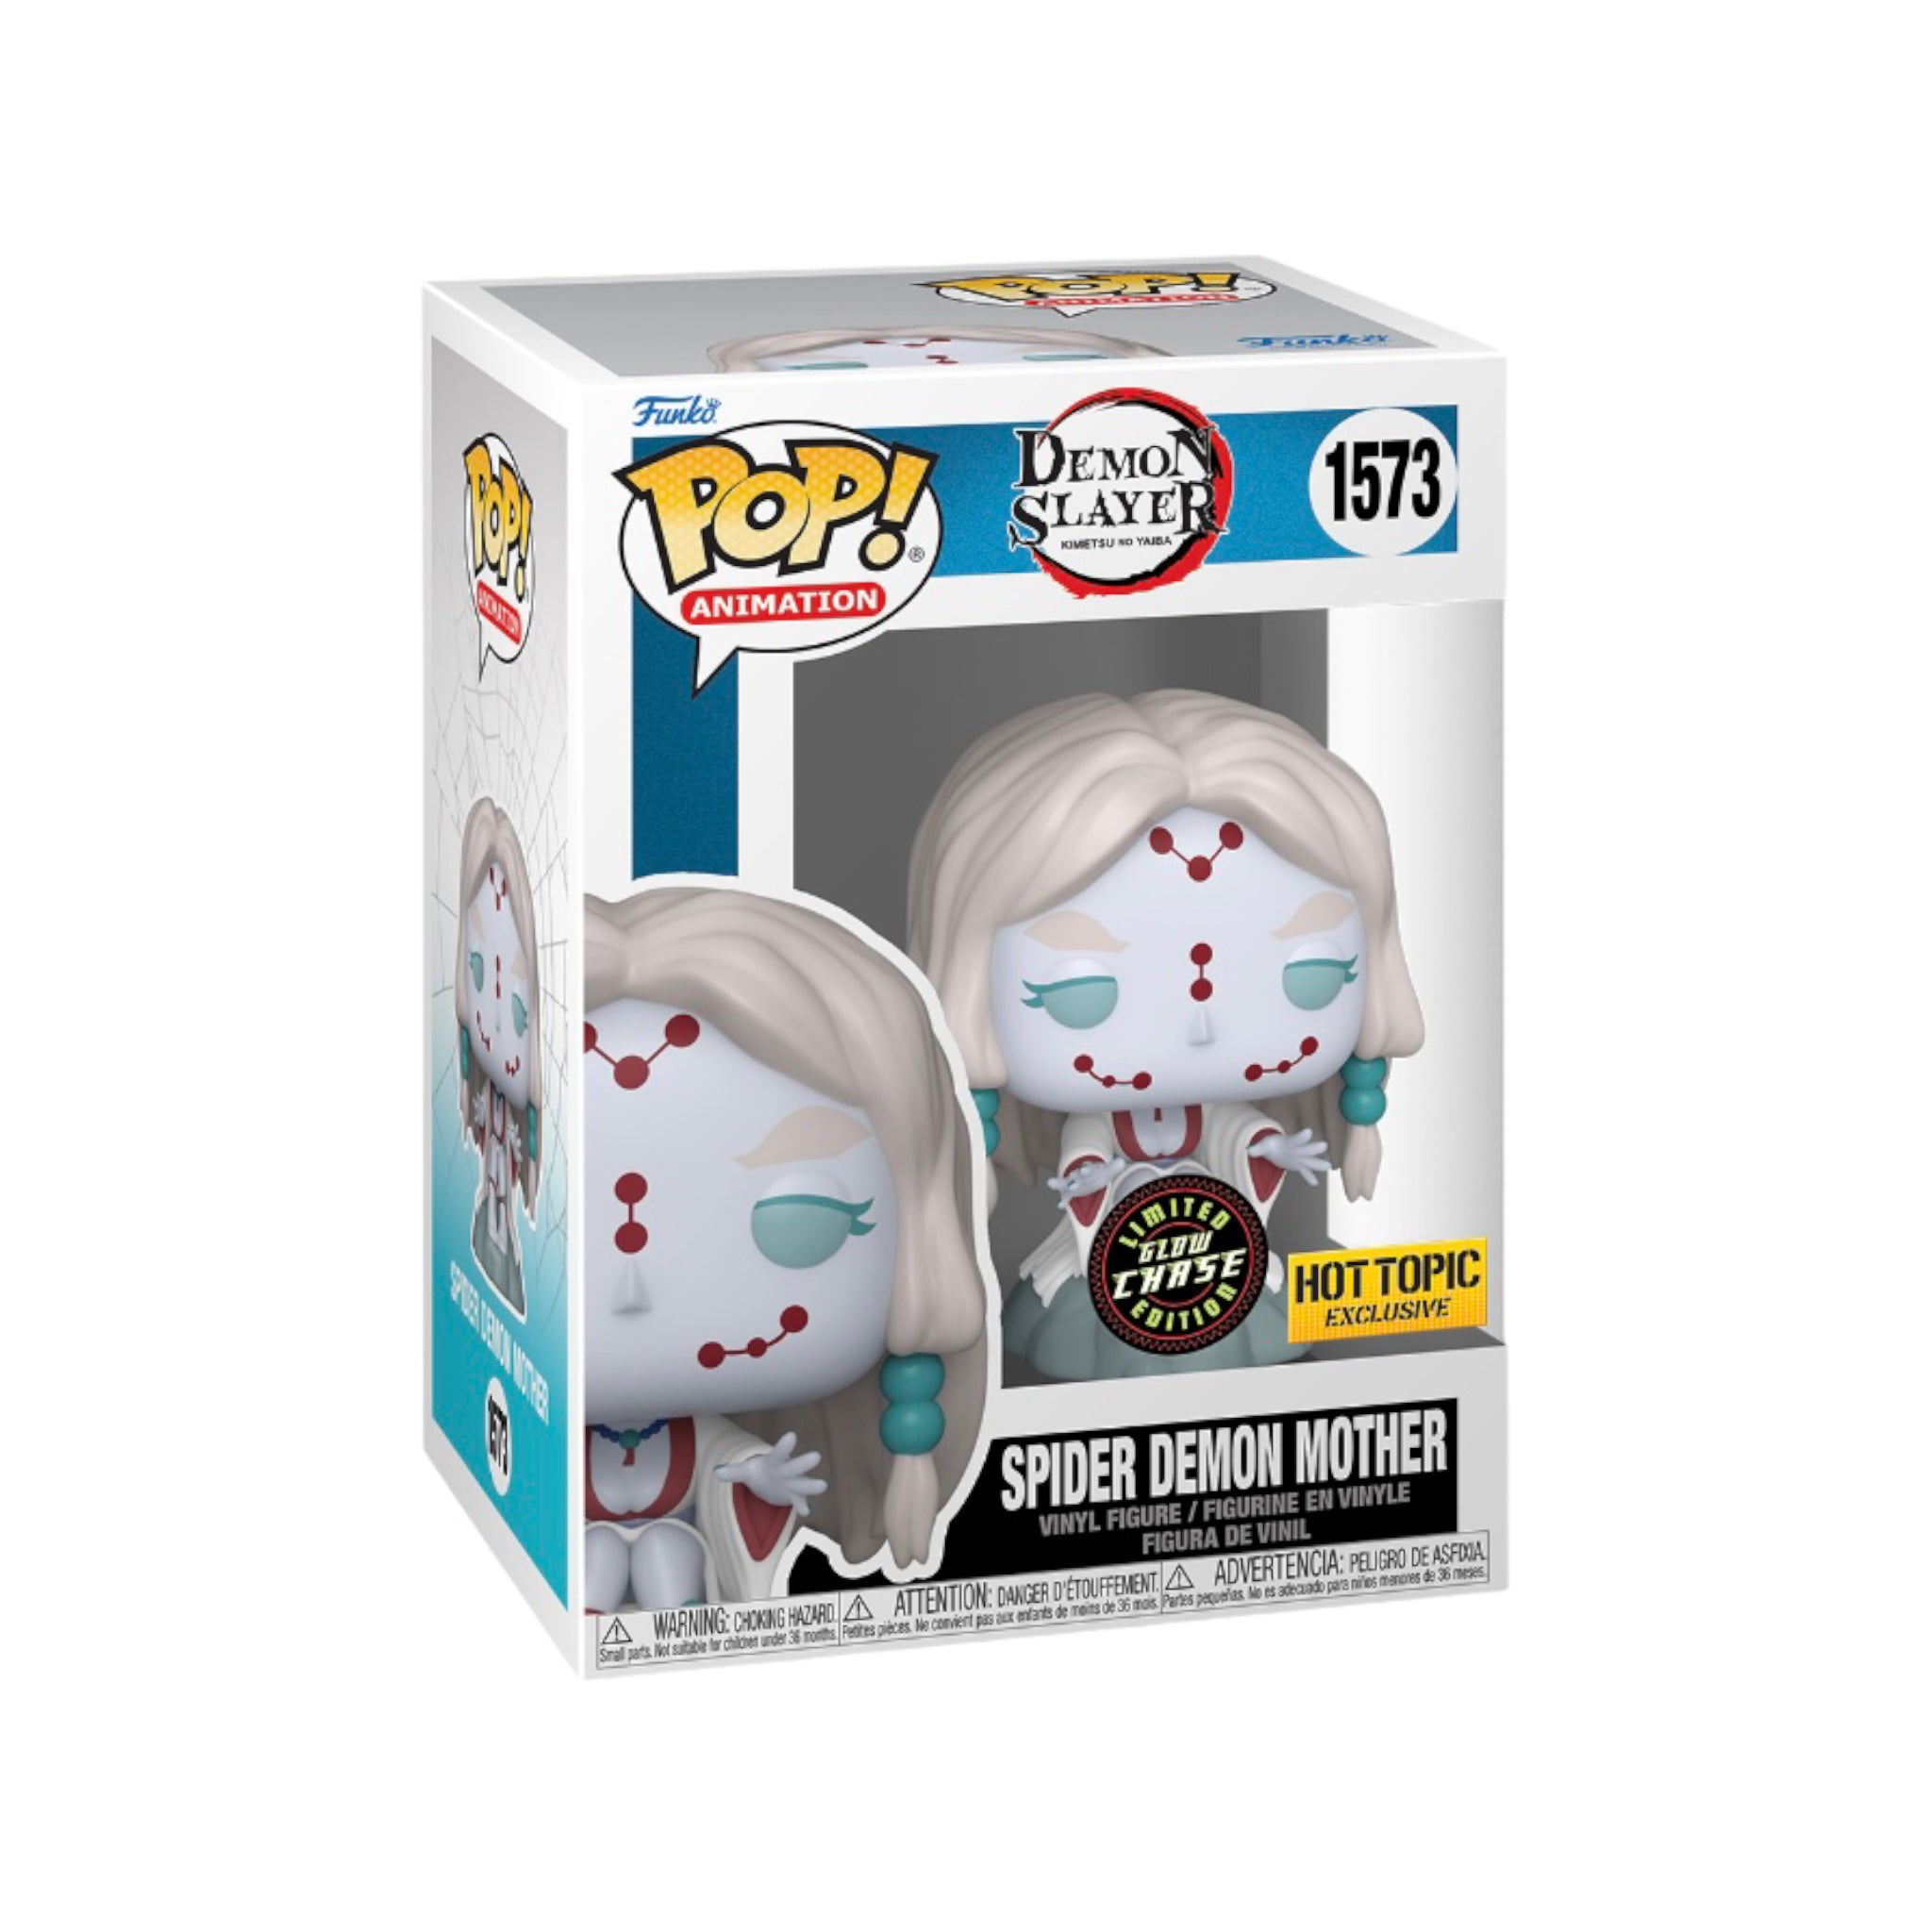 Spider Demon Mother #1573 (Glow Chase) Funko Pop! - Demon Slayer - Hot Topic Exclusive